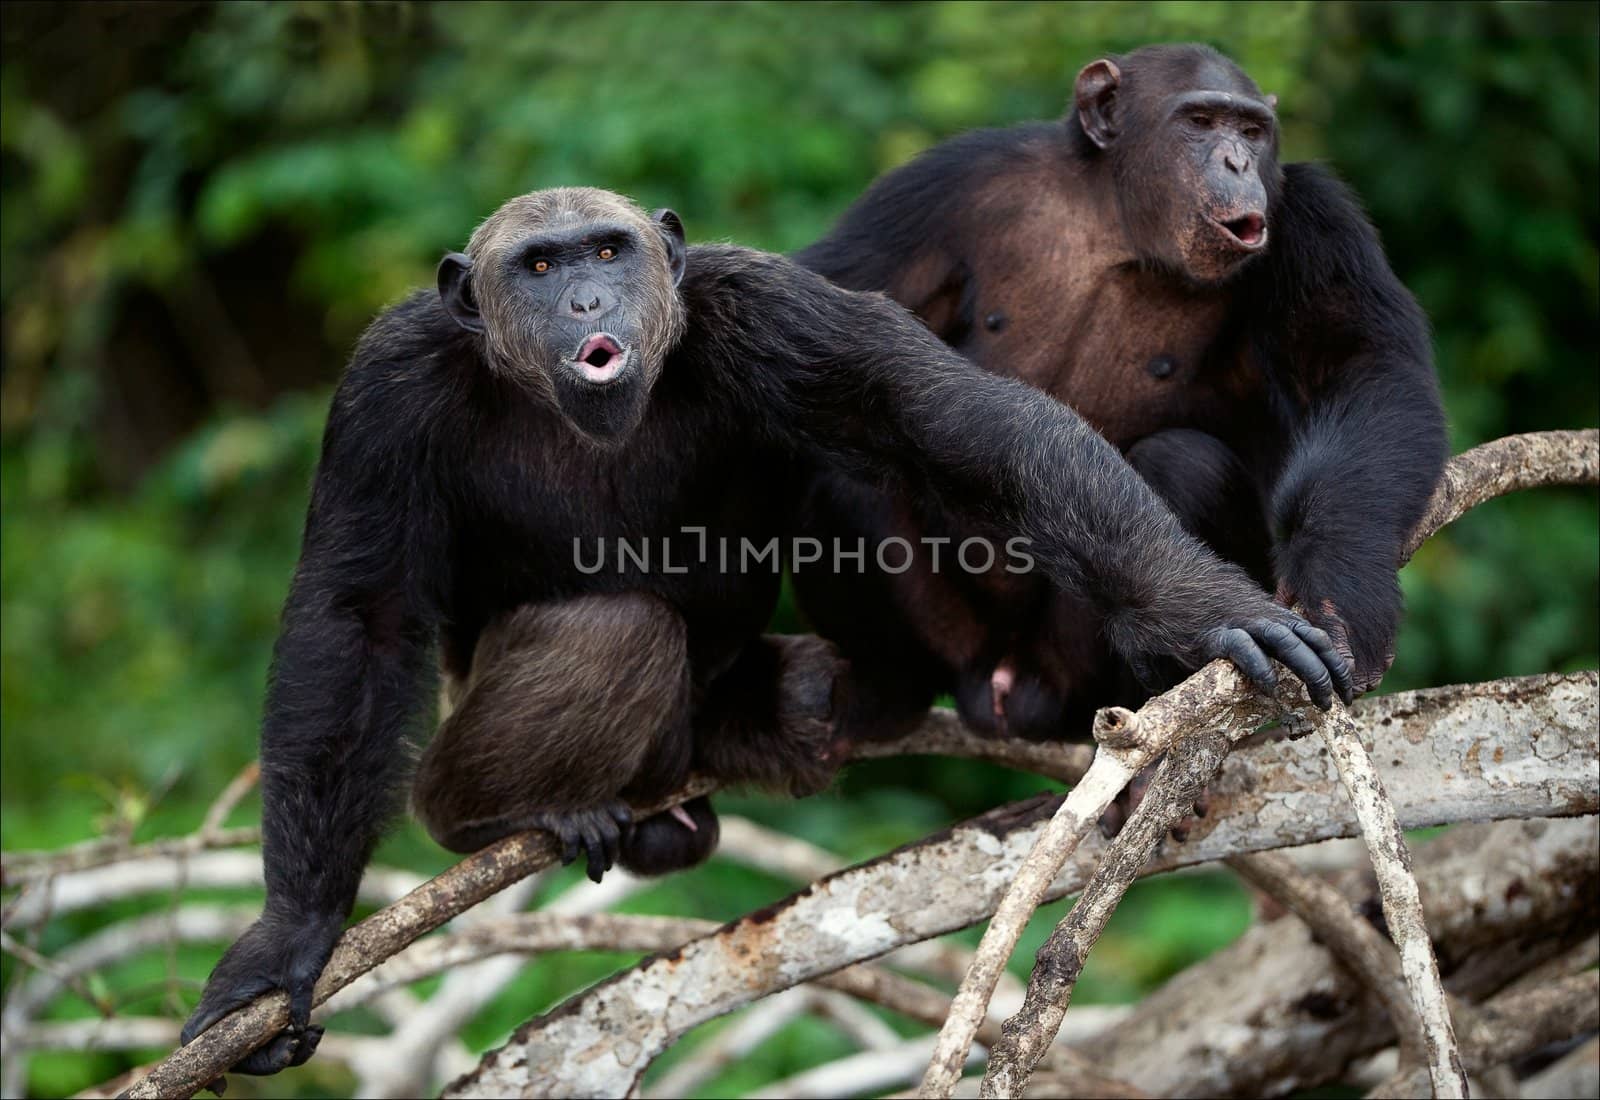 Songs. Chimpanzees sit on a tree branch in wood and songs bawl.